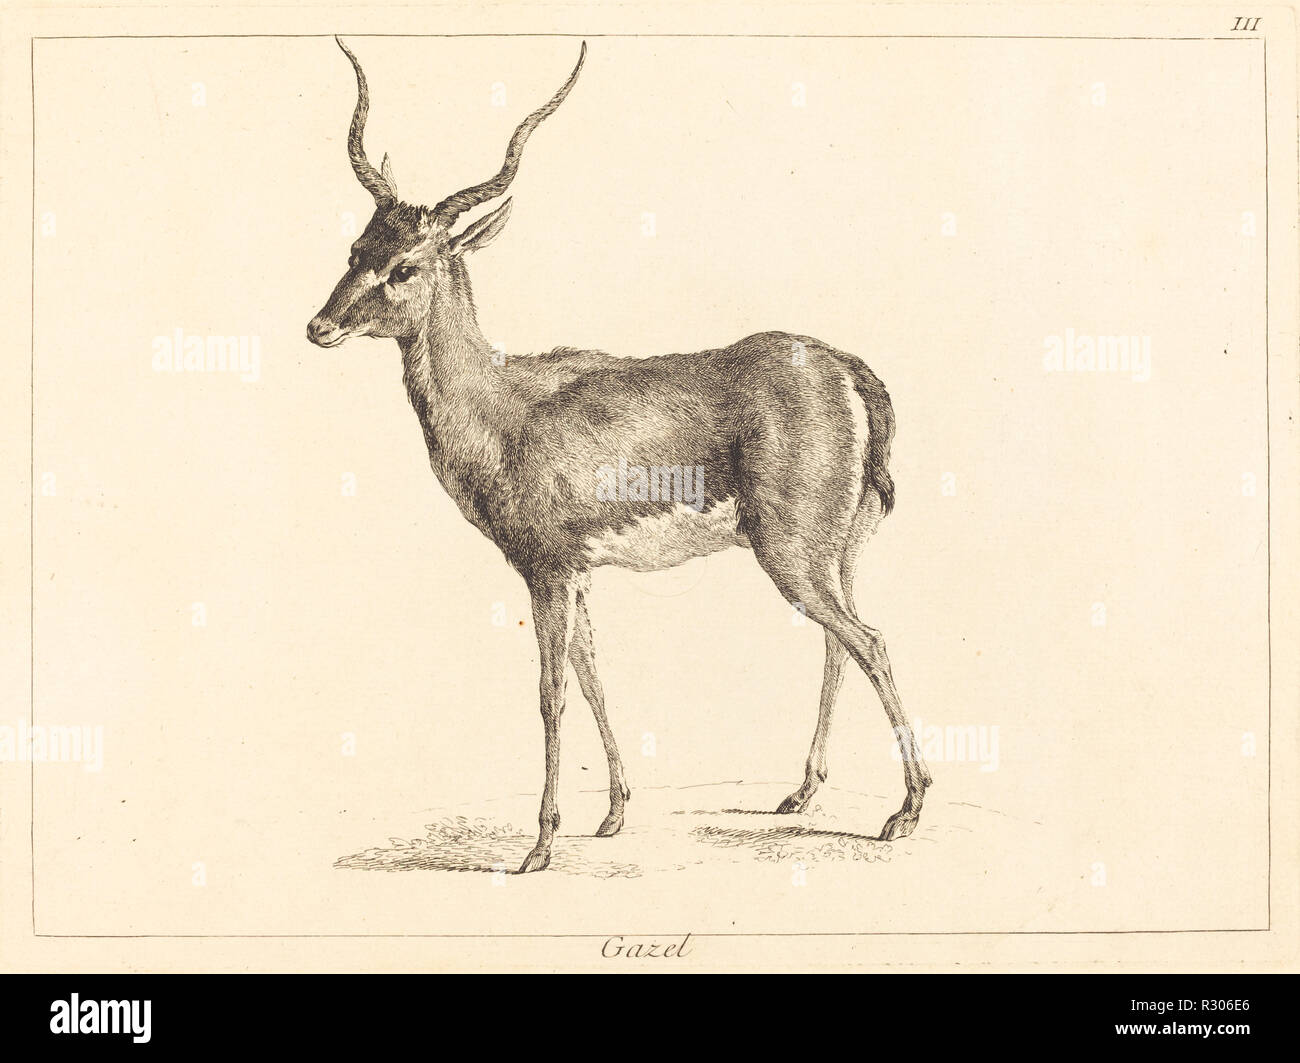 Gazel (Gazelle). Medium: etching finished with burin. Museum: National Gallery of Art, Washington DC. Author: Jacques-Philippe Le Bas and Jean Eric Rehn after Jean-Baptiste Oudry. Stock Photo